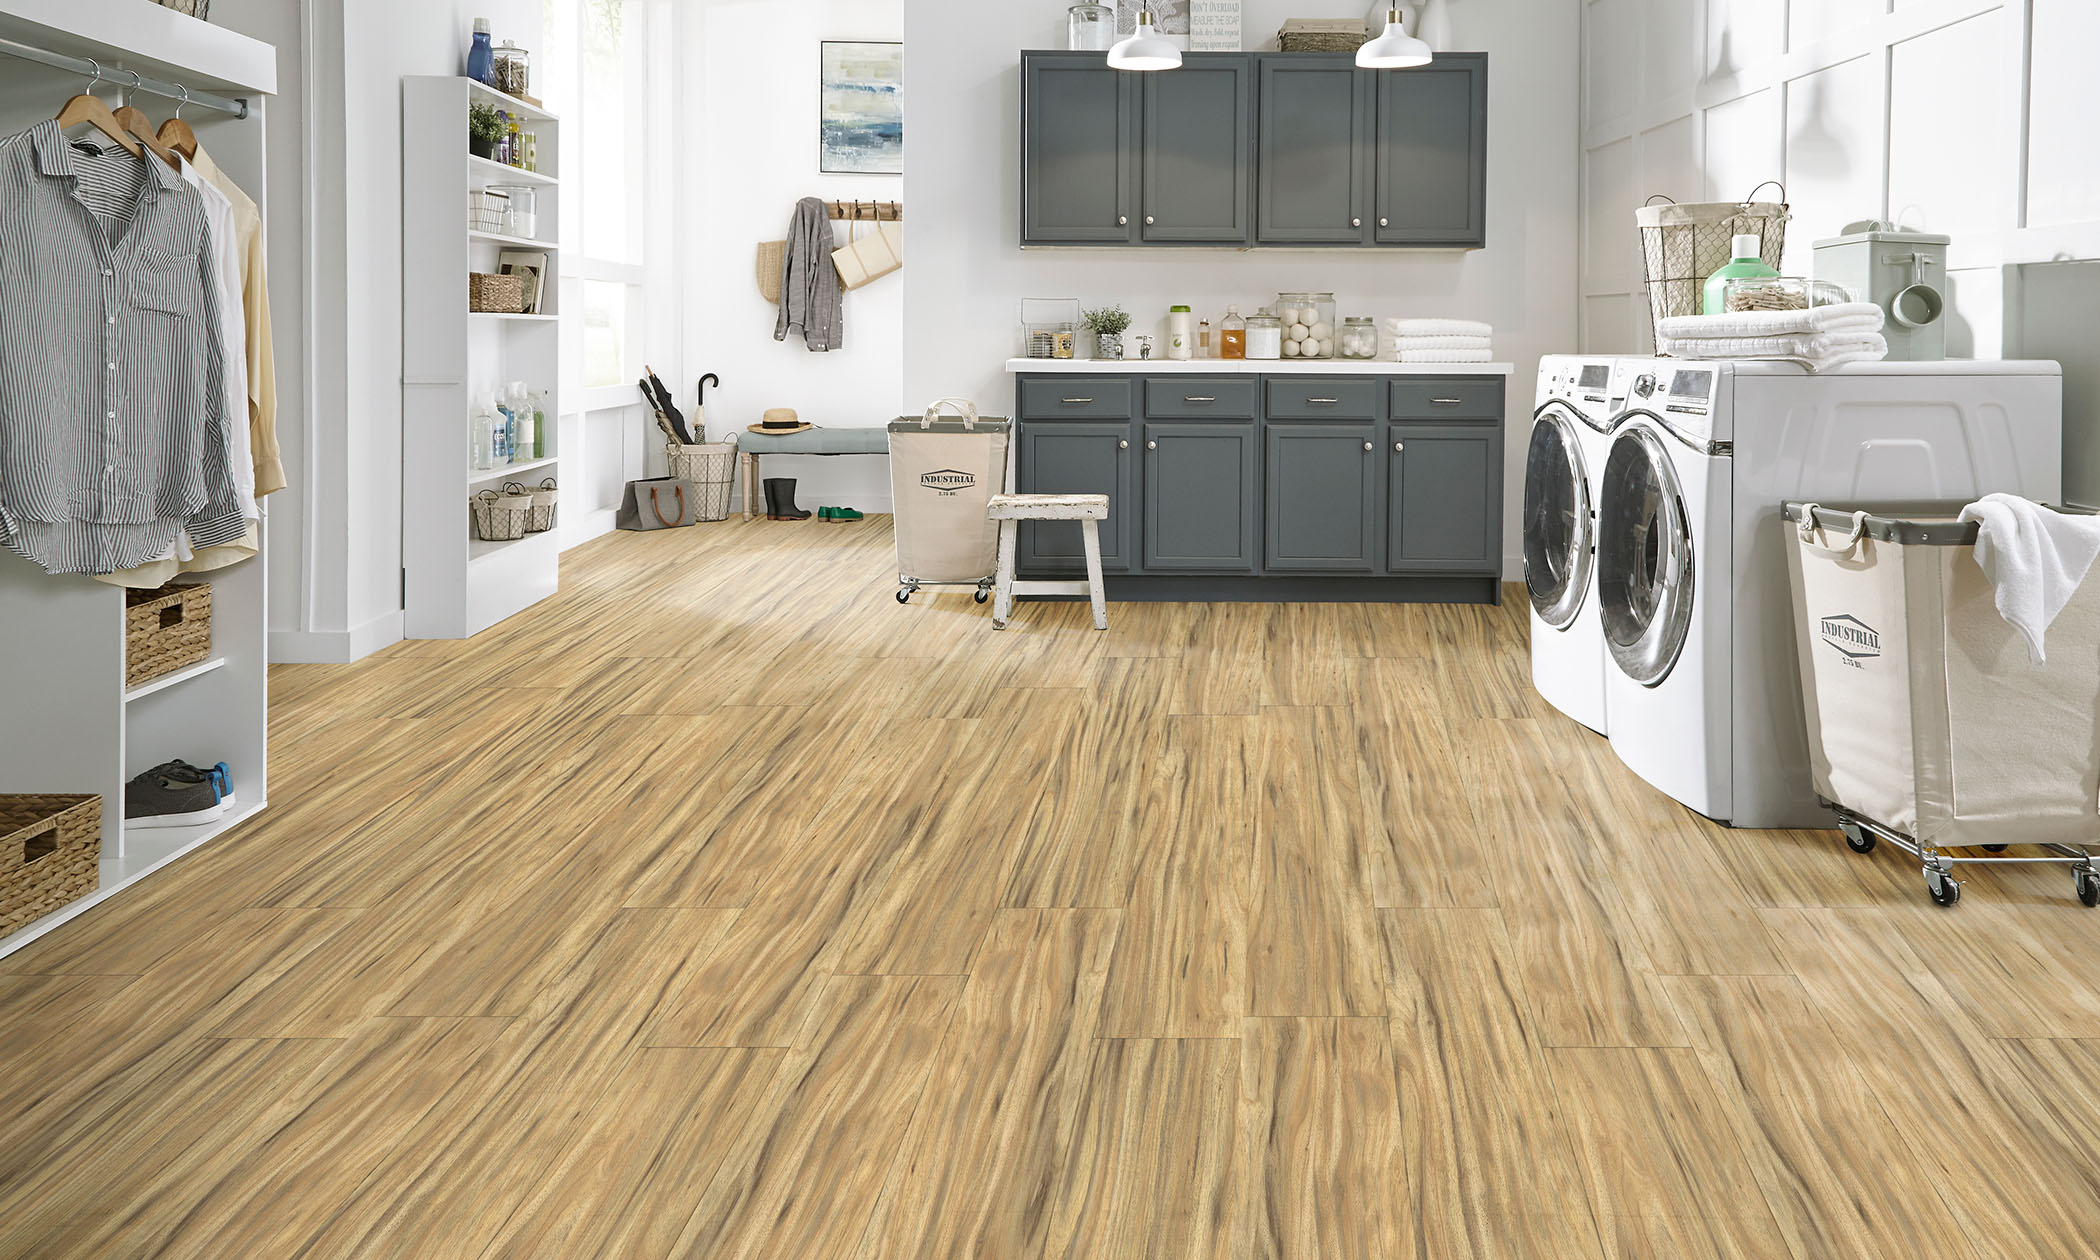 image of mudroom or laundry room with waterproof flooring from ll flooring